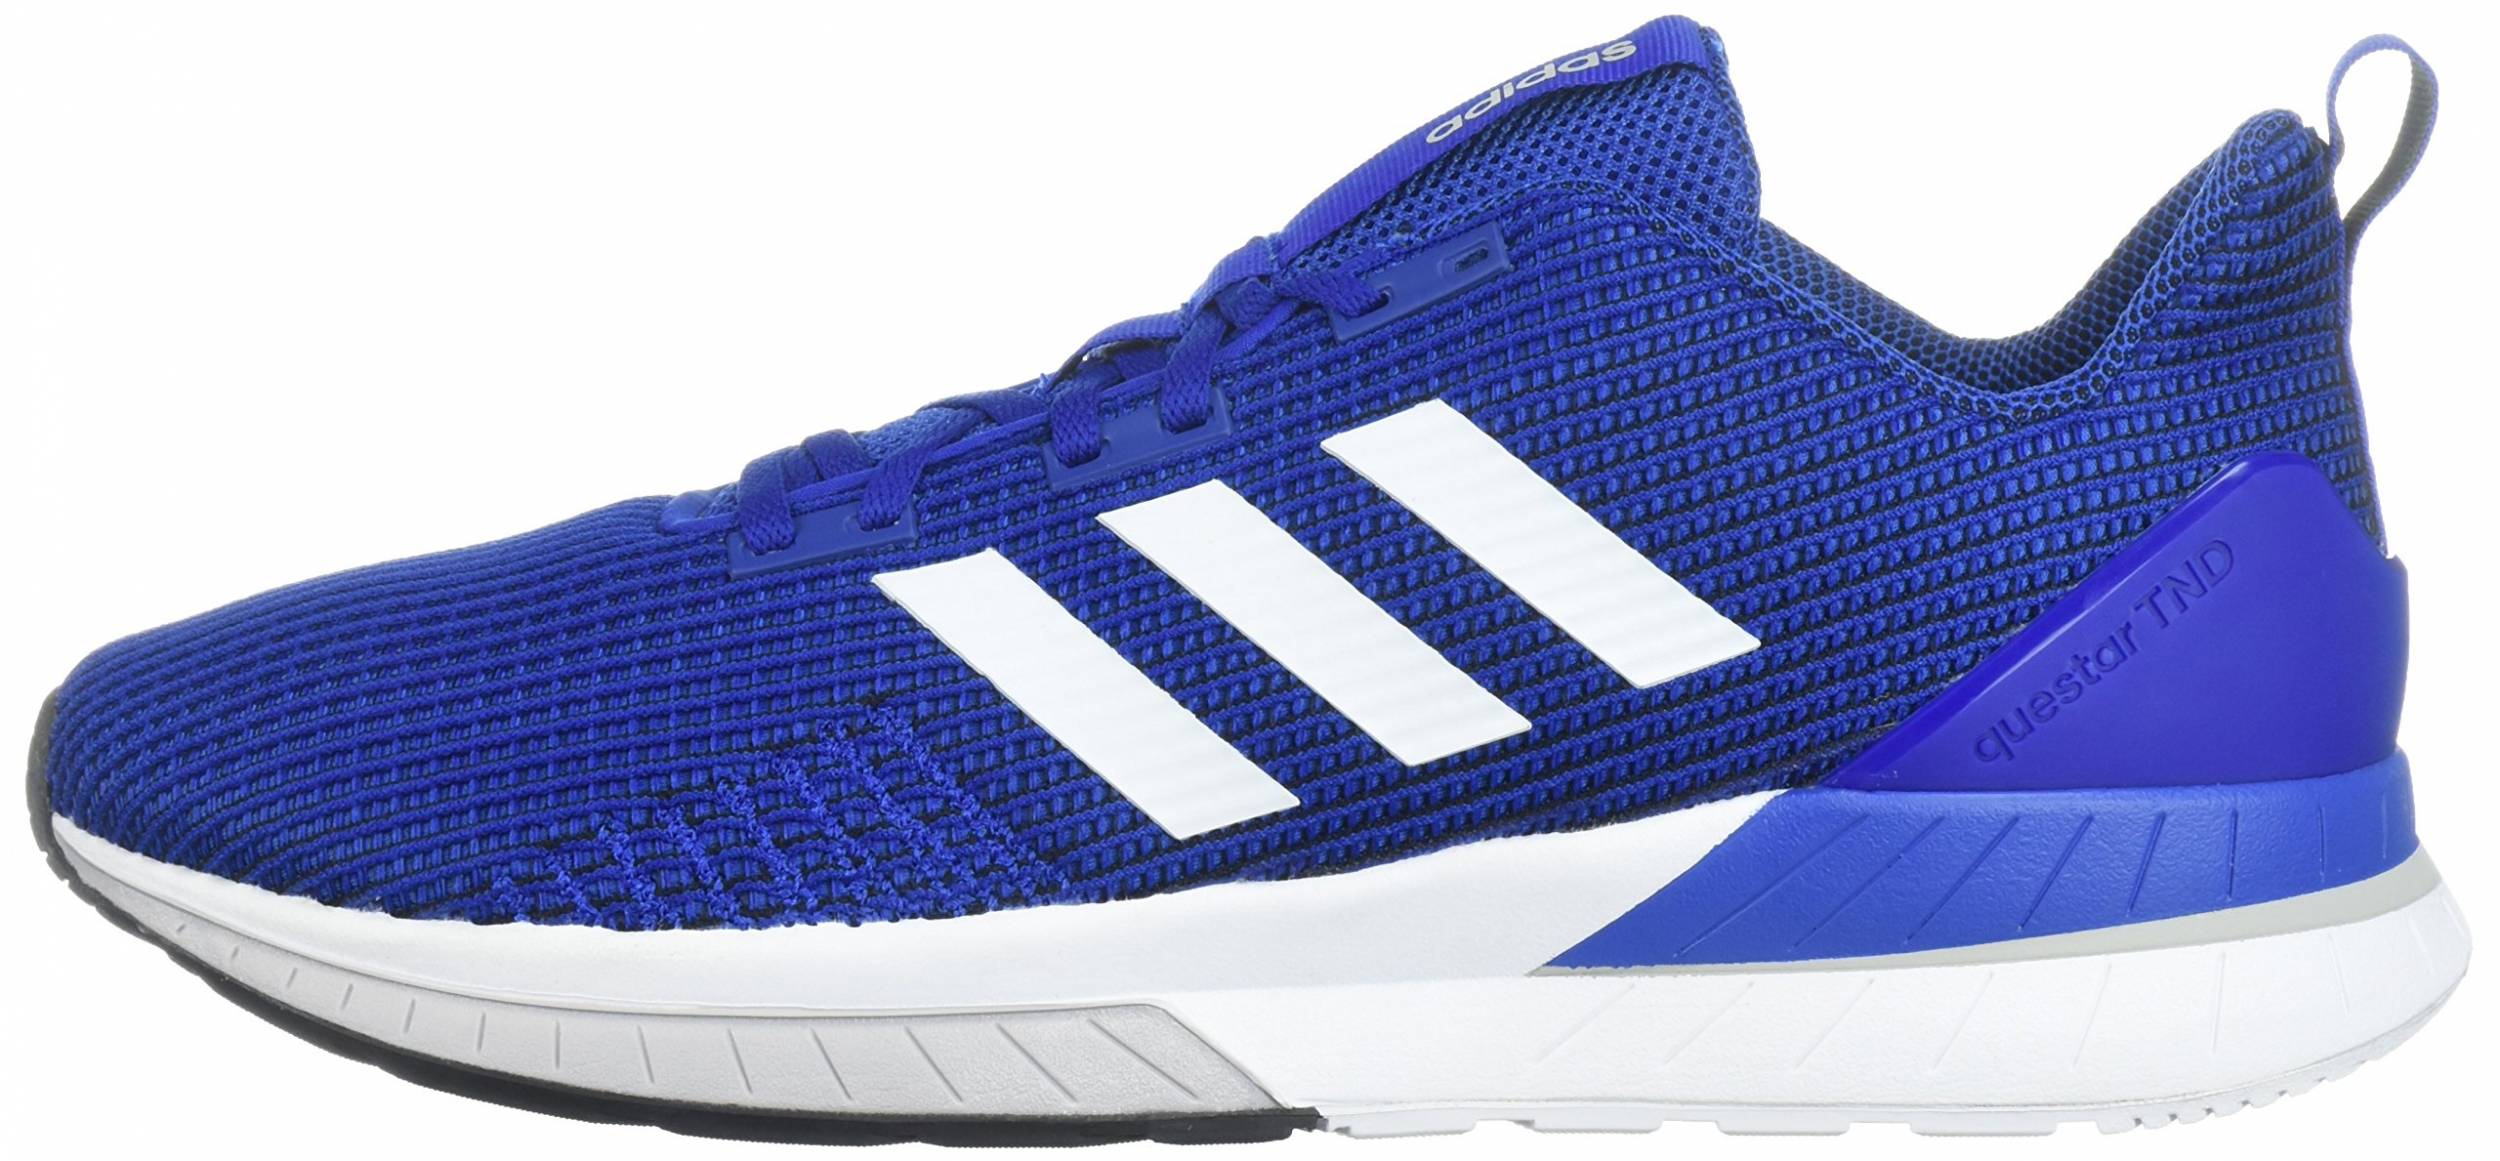 Only $50 + Review of Adidas Questar TND 